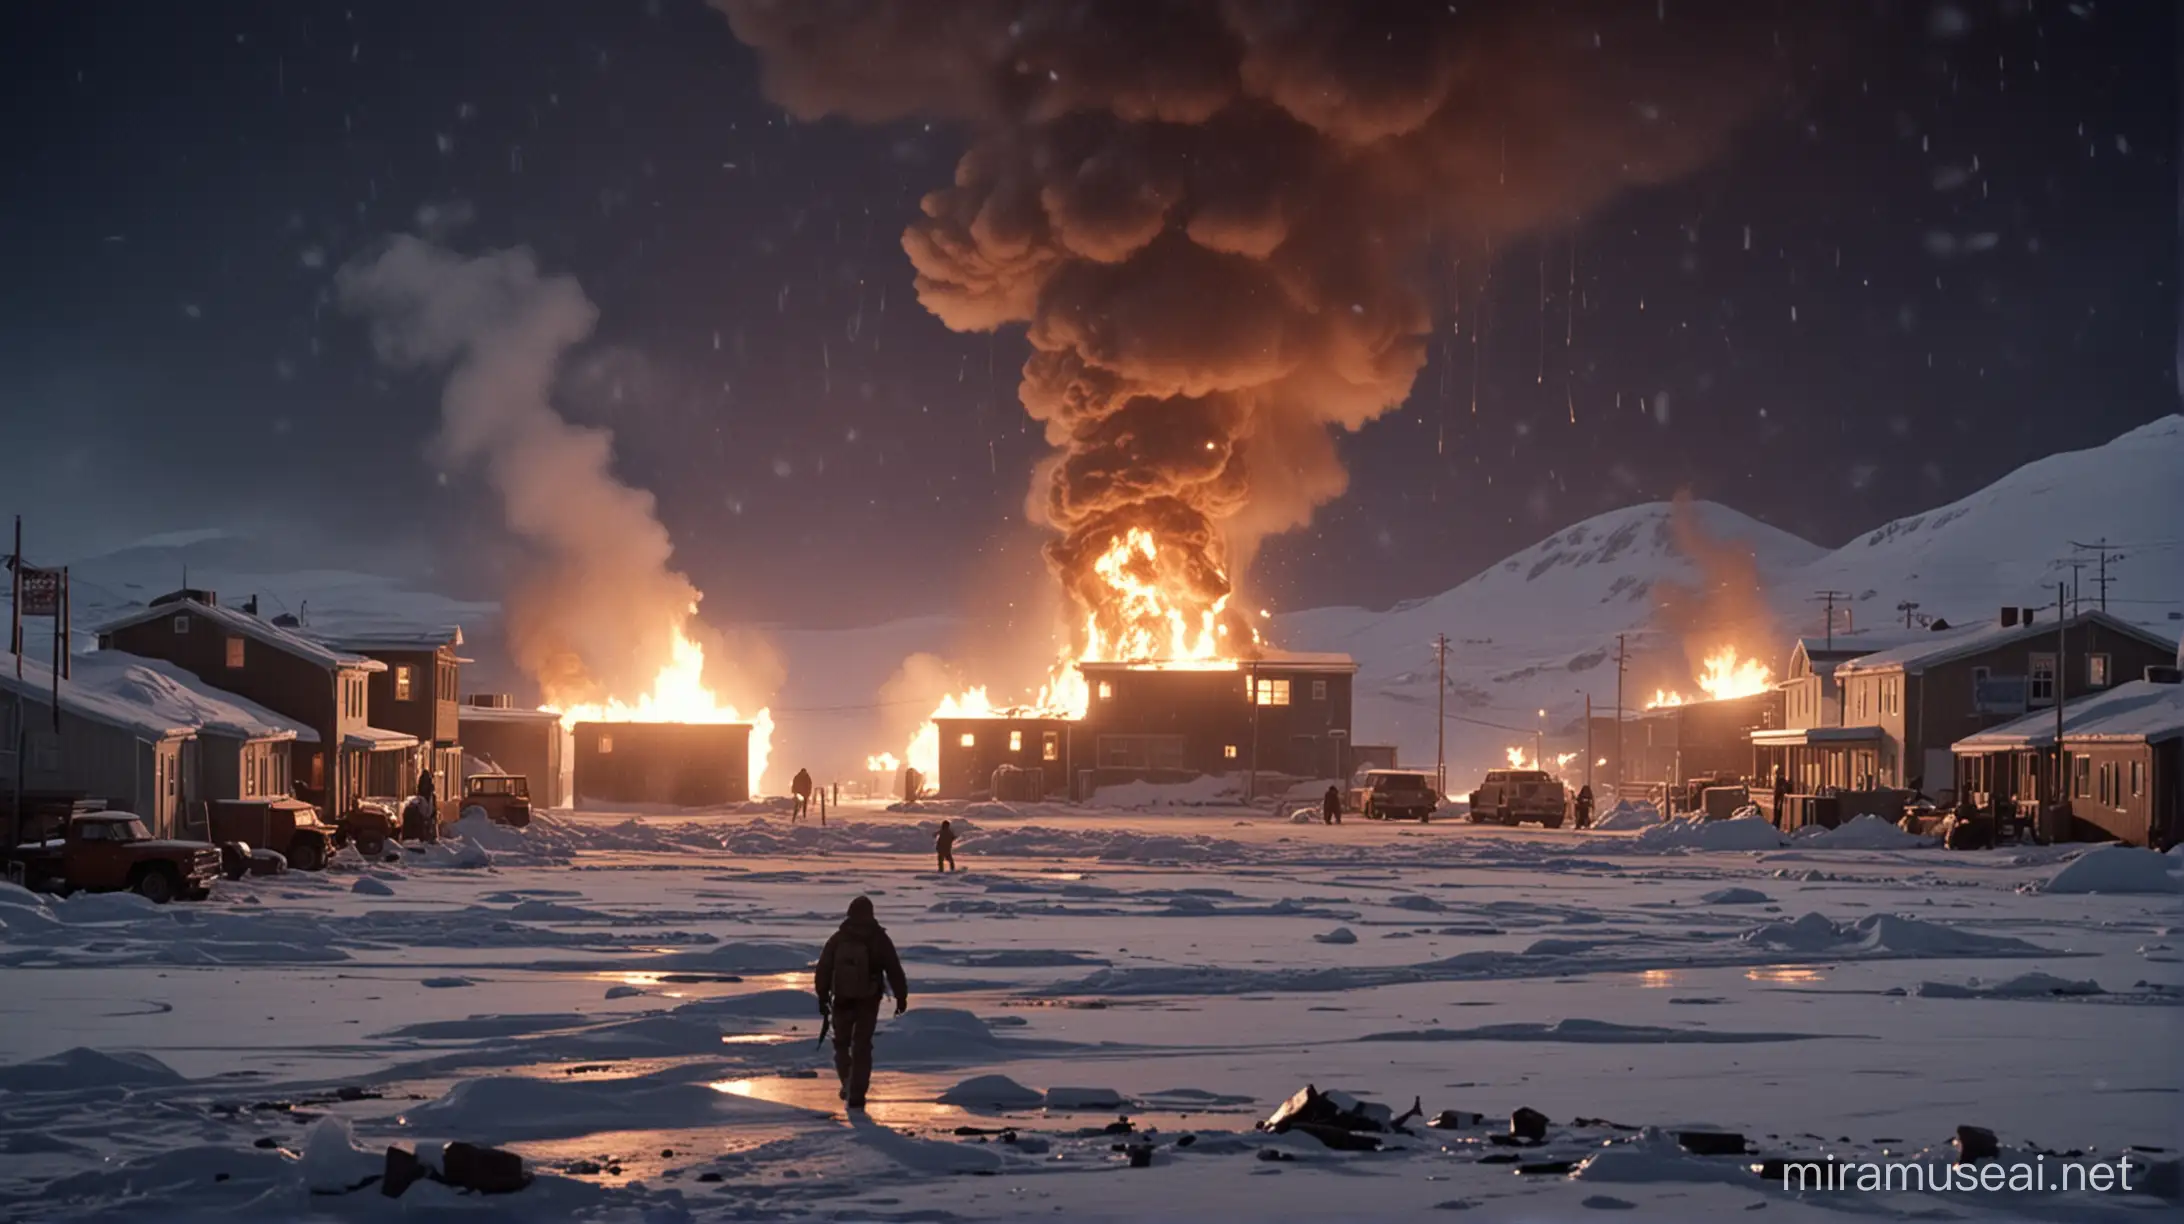 Cinematic Still The Thing Inspired Scene with Buildings Ablaze in Antarctic Blizzard